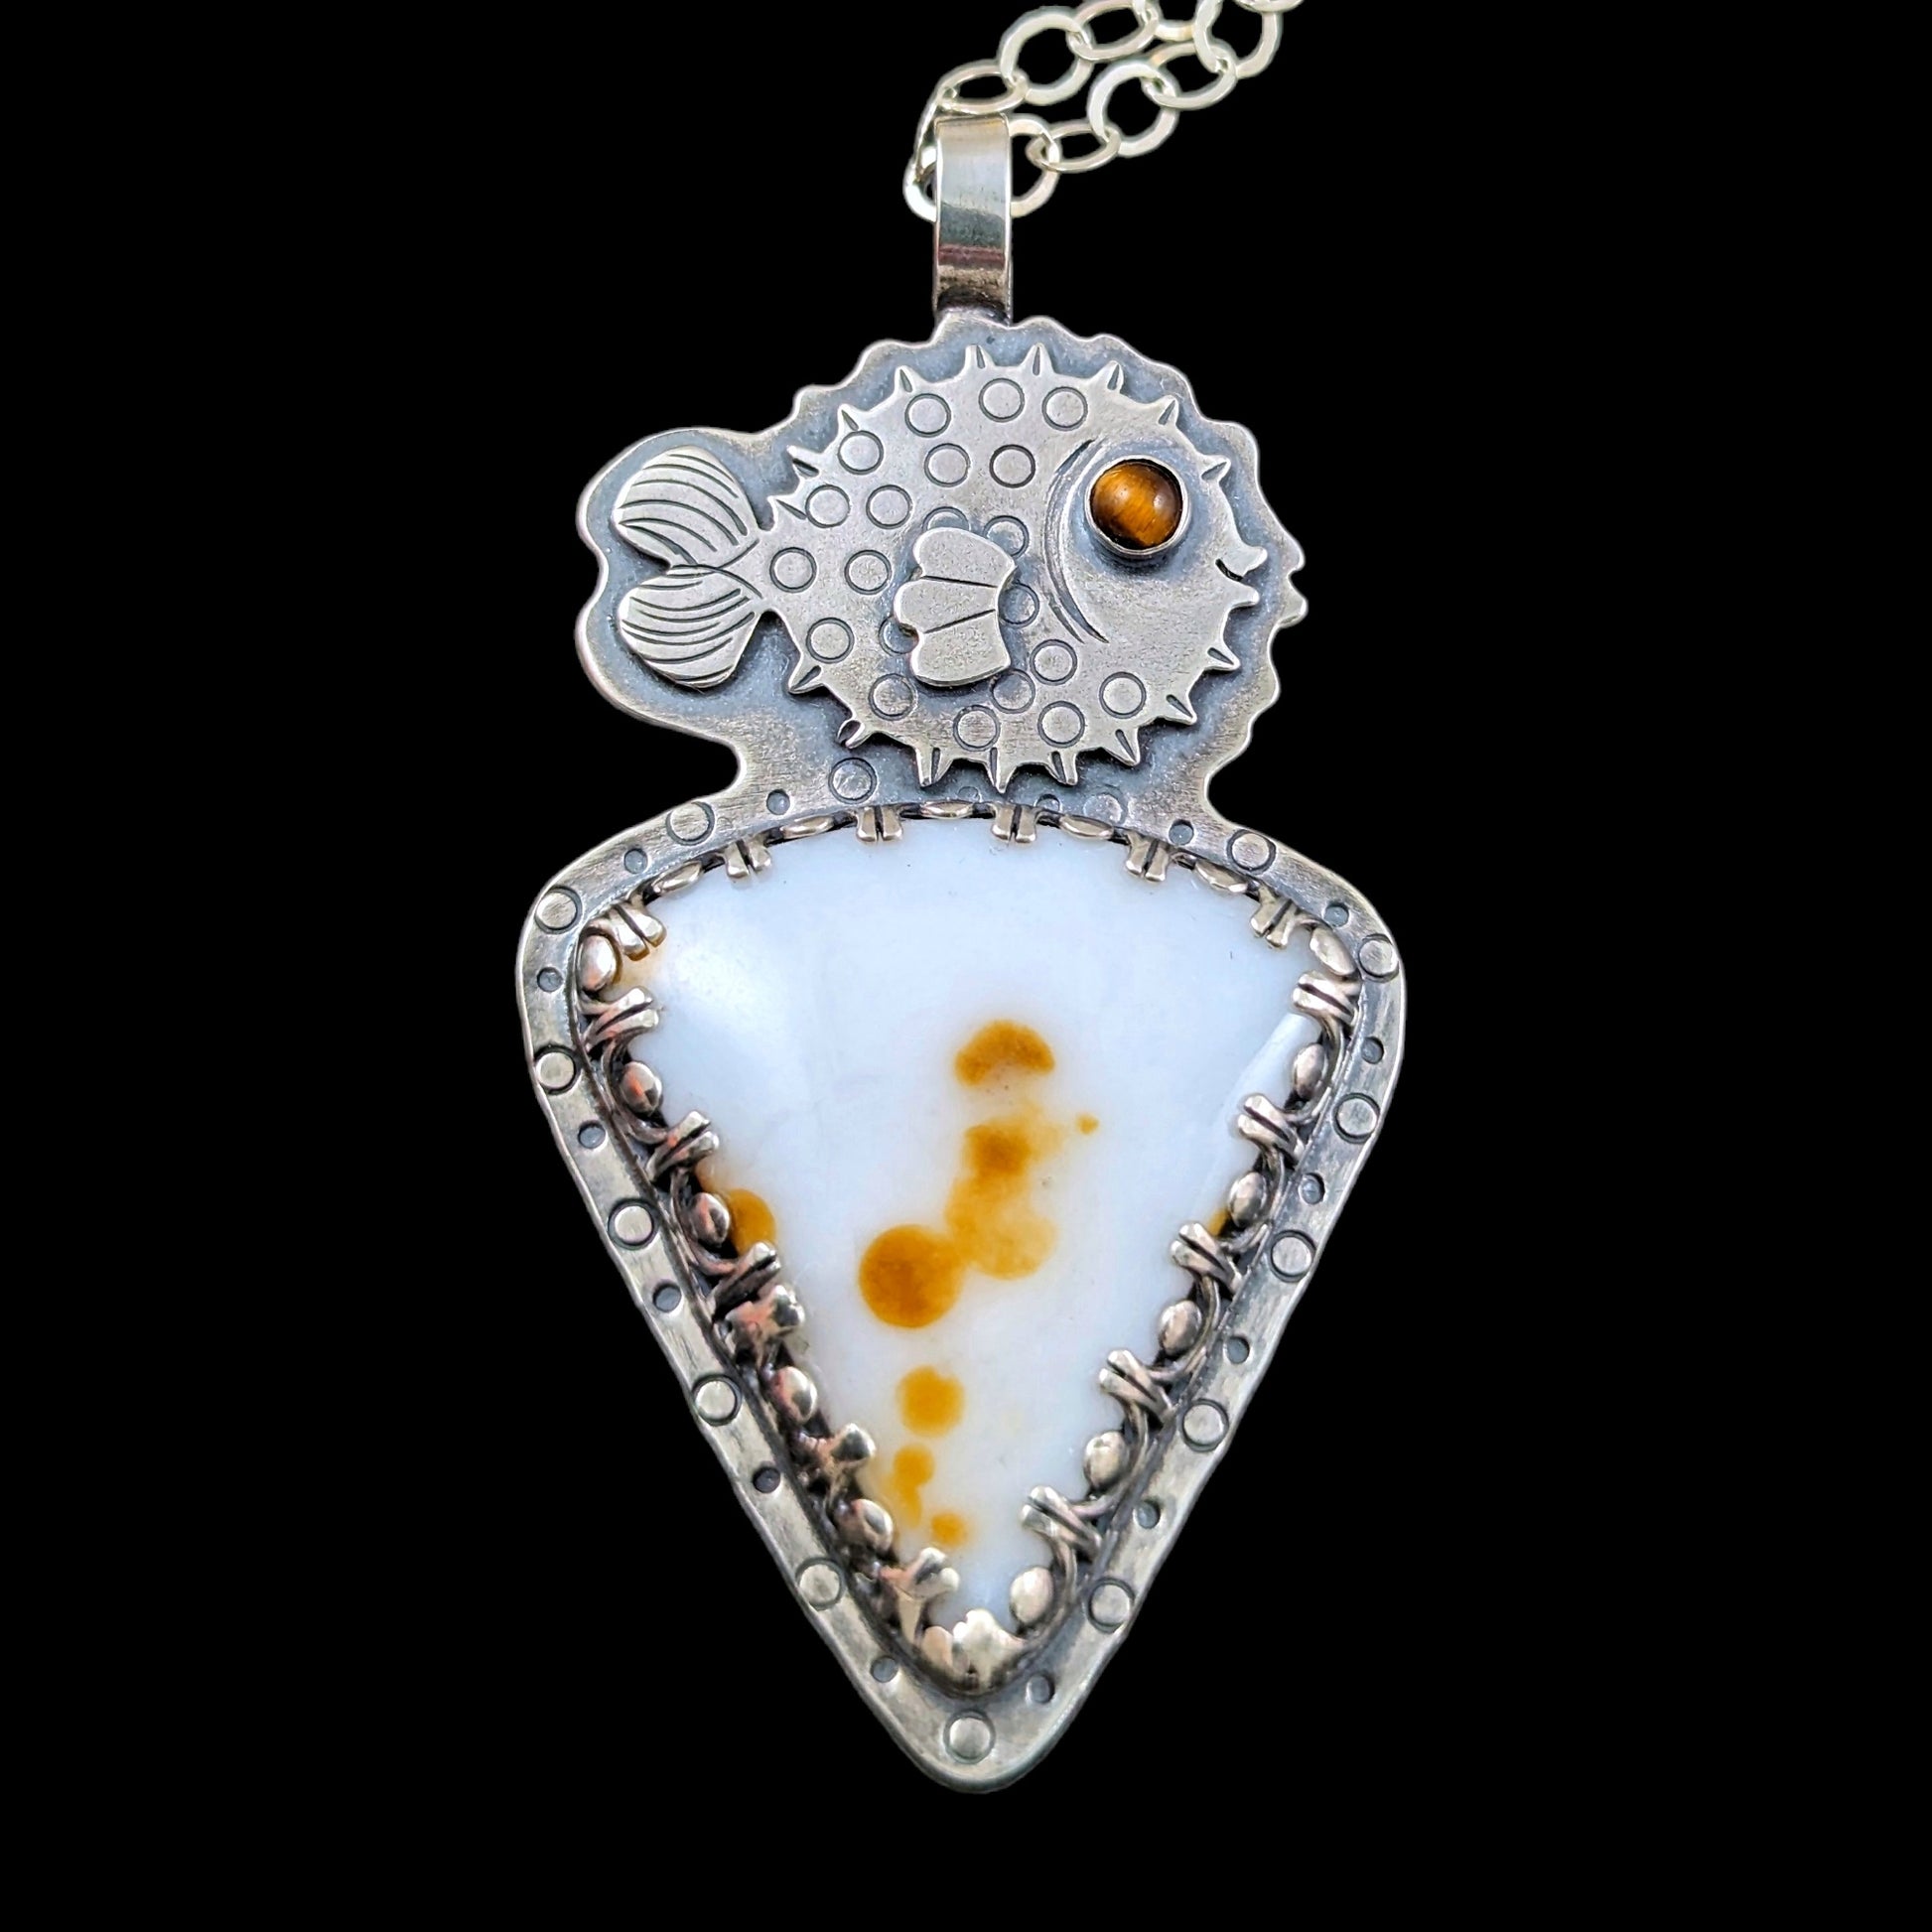 Puffer fish necklace with polka dot agate